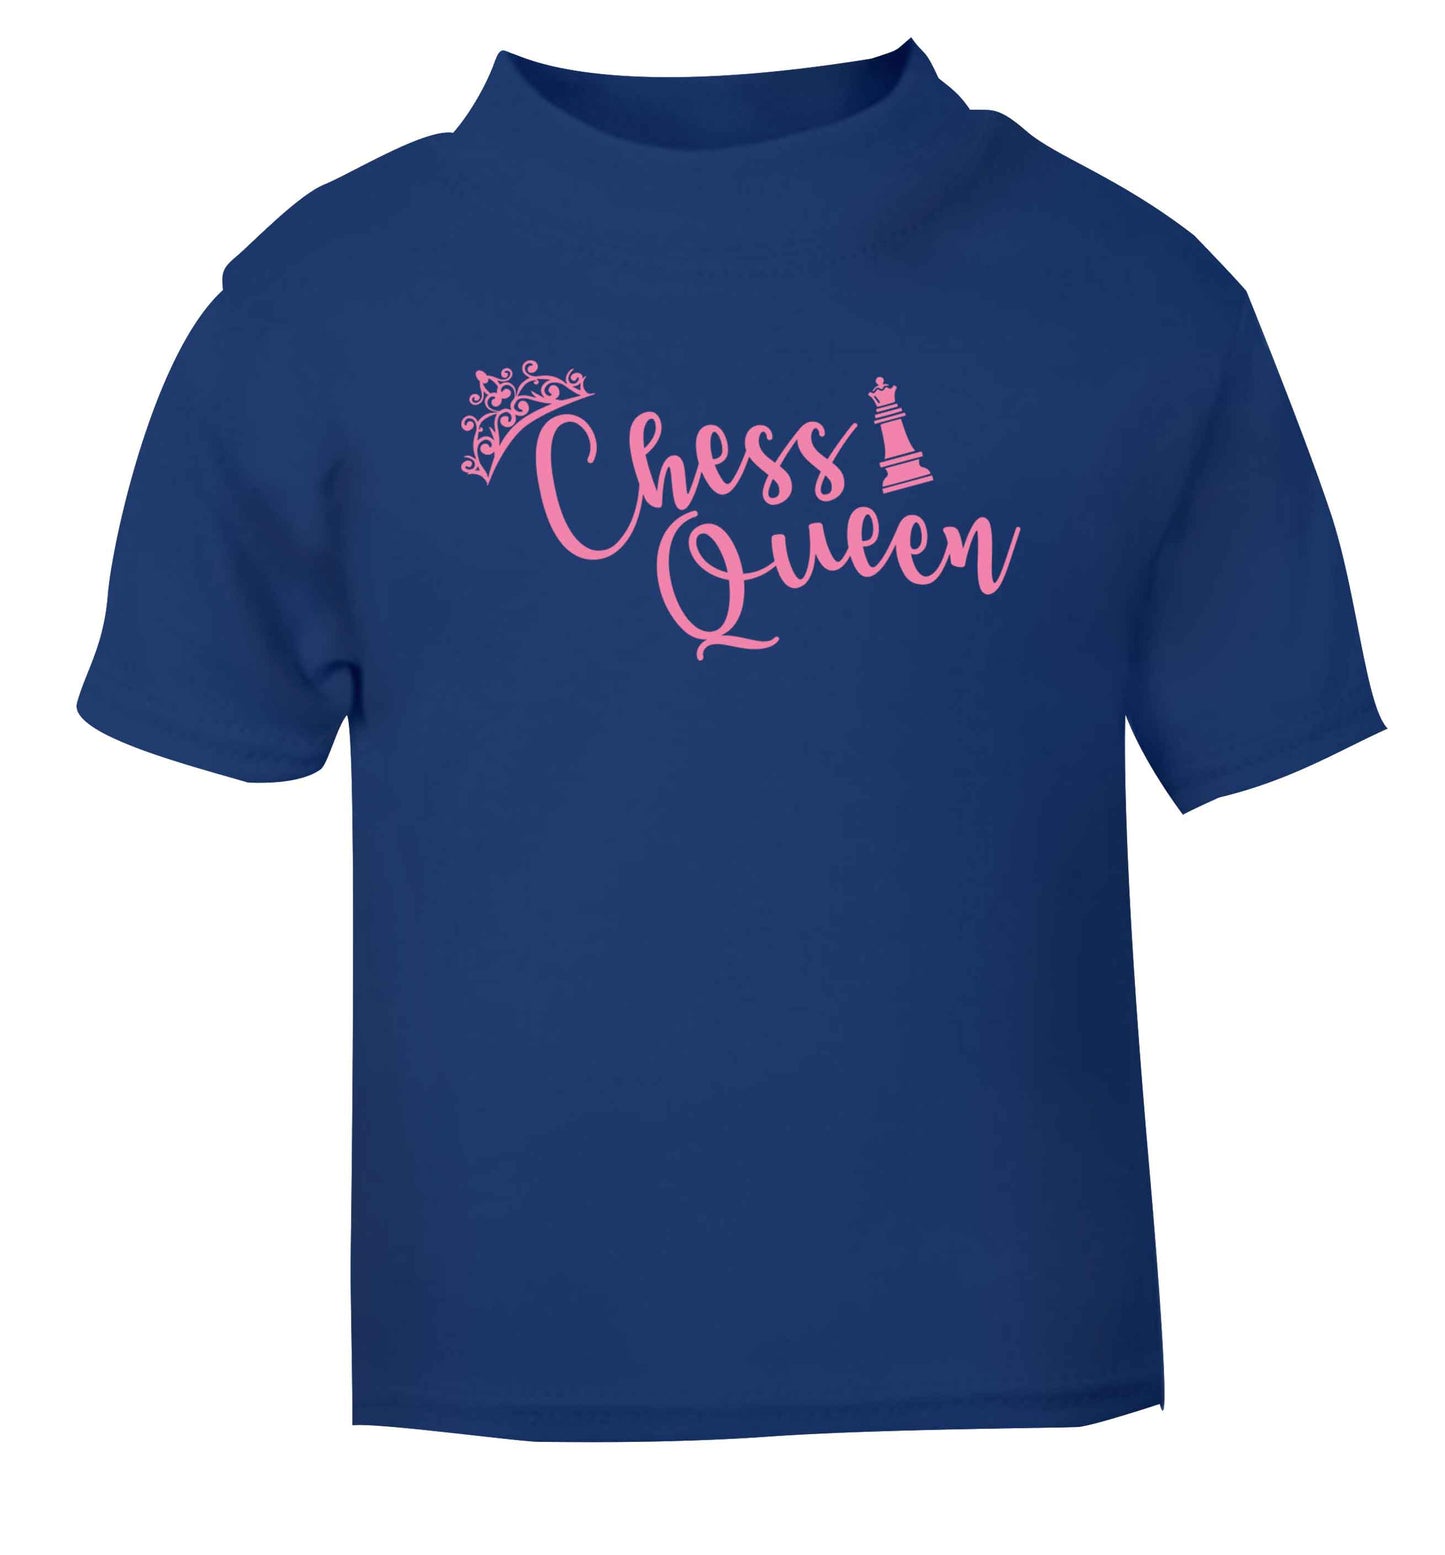 Pink chess queen  blue Baby Toddler Tshirt 2 Years